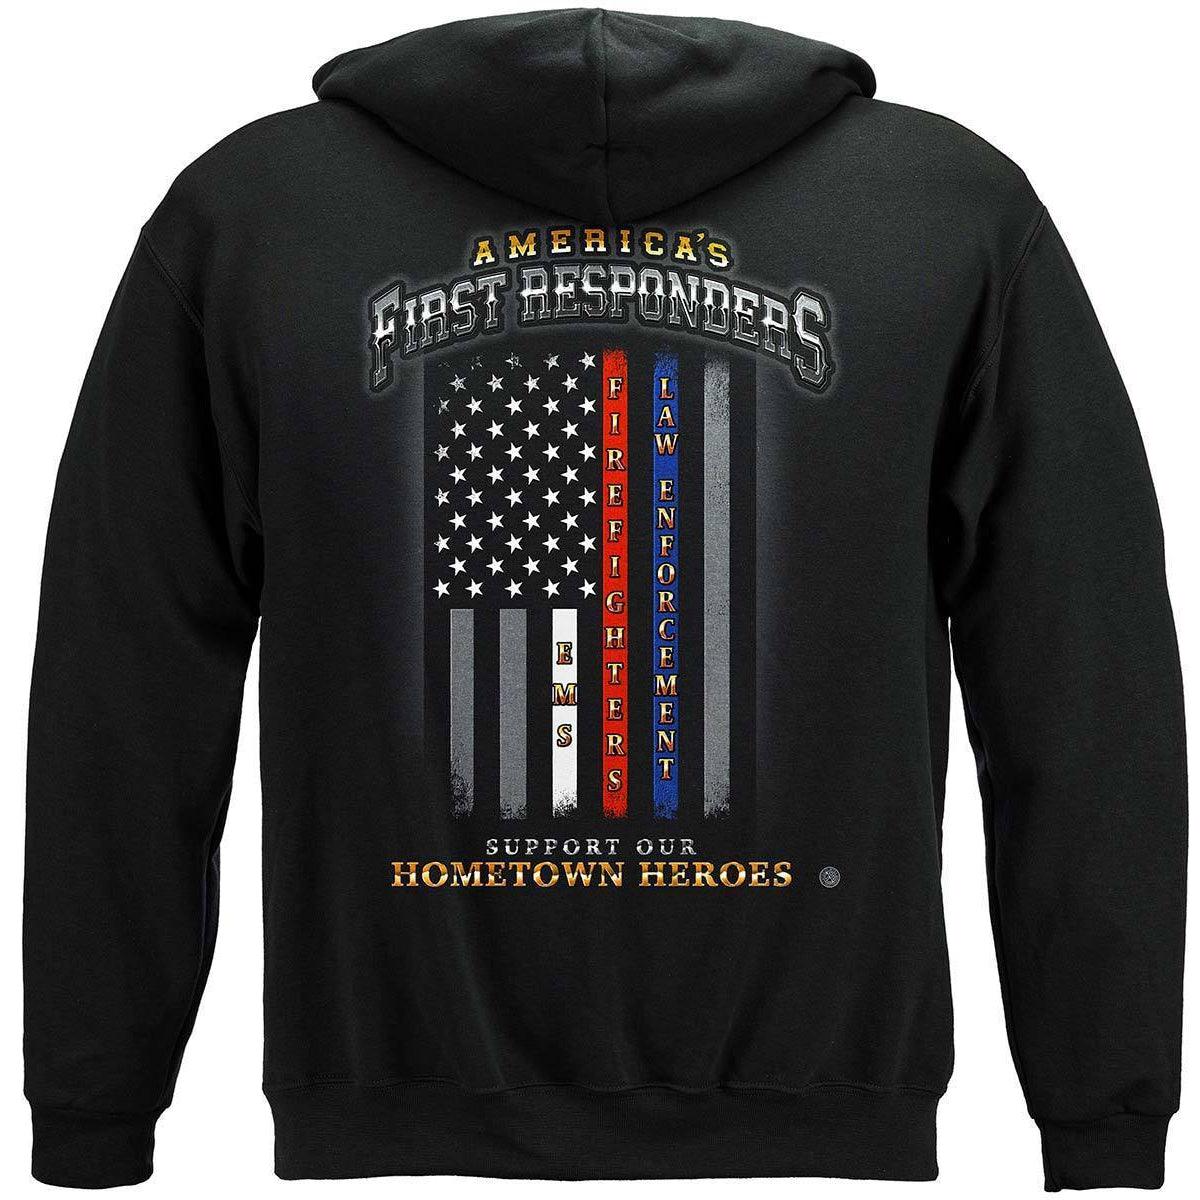 First Responders Flag Home Town Heroes T-Shirt - Military Republic